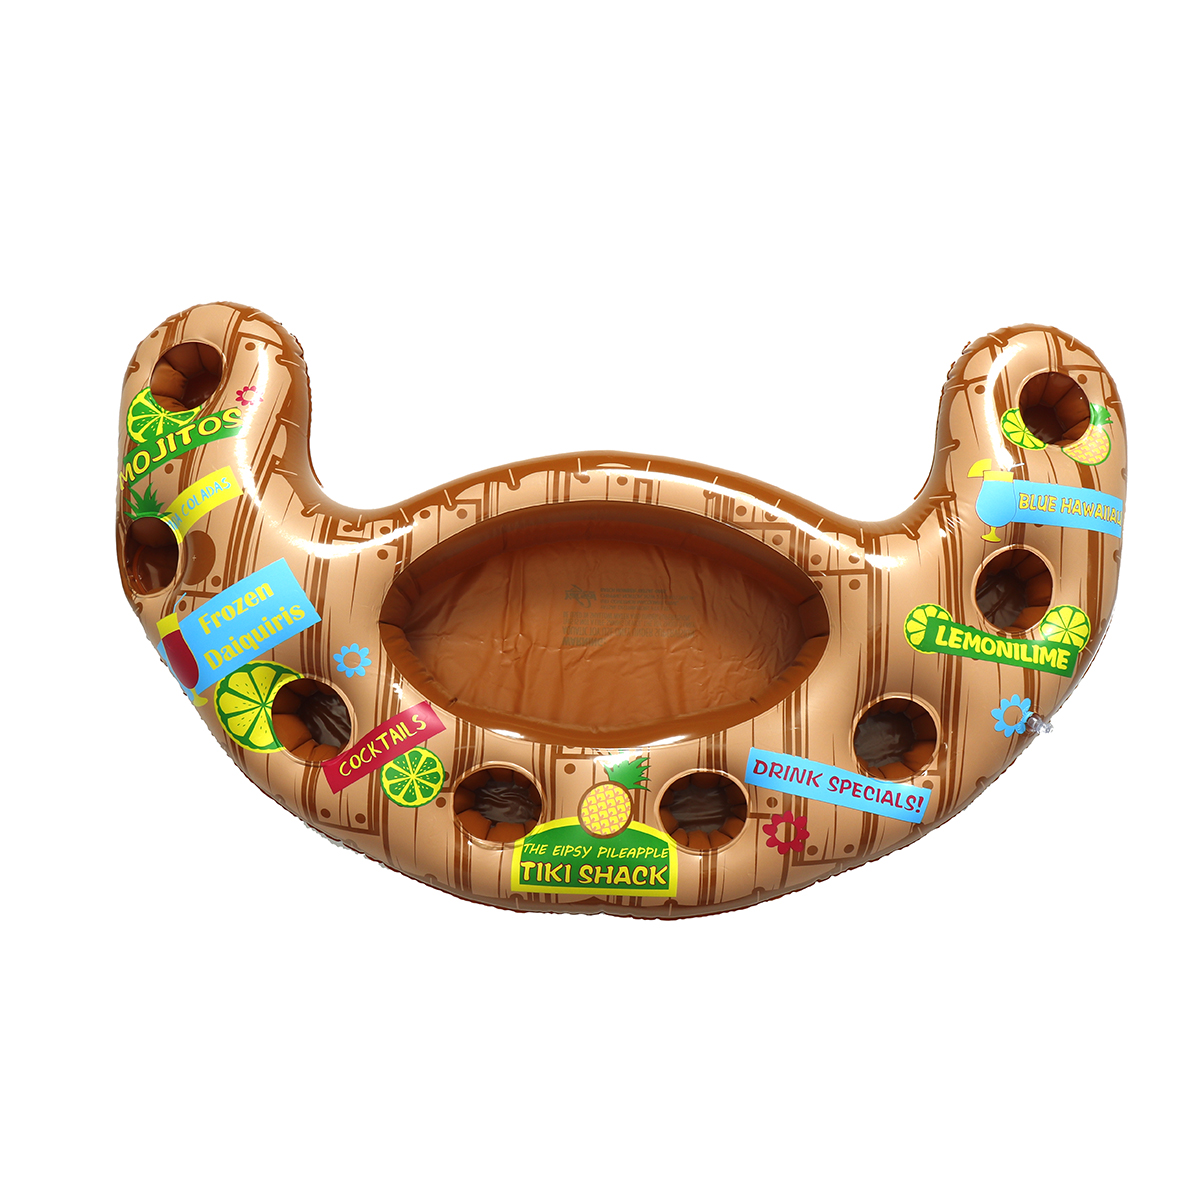 Inflatable-Float-Cup-Holder-Drink-Ice-Bucket-Cooler-Beach-Swim-Party-Water-Play-Fun-Toy-1509216-5